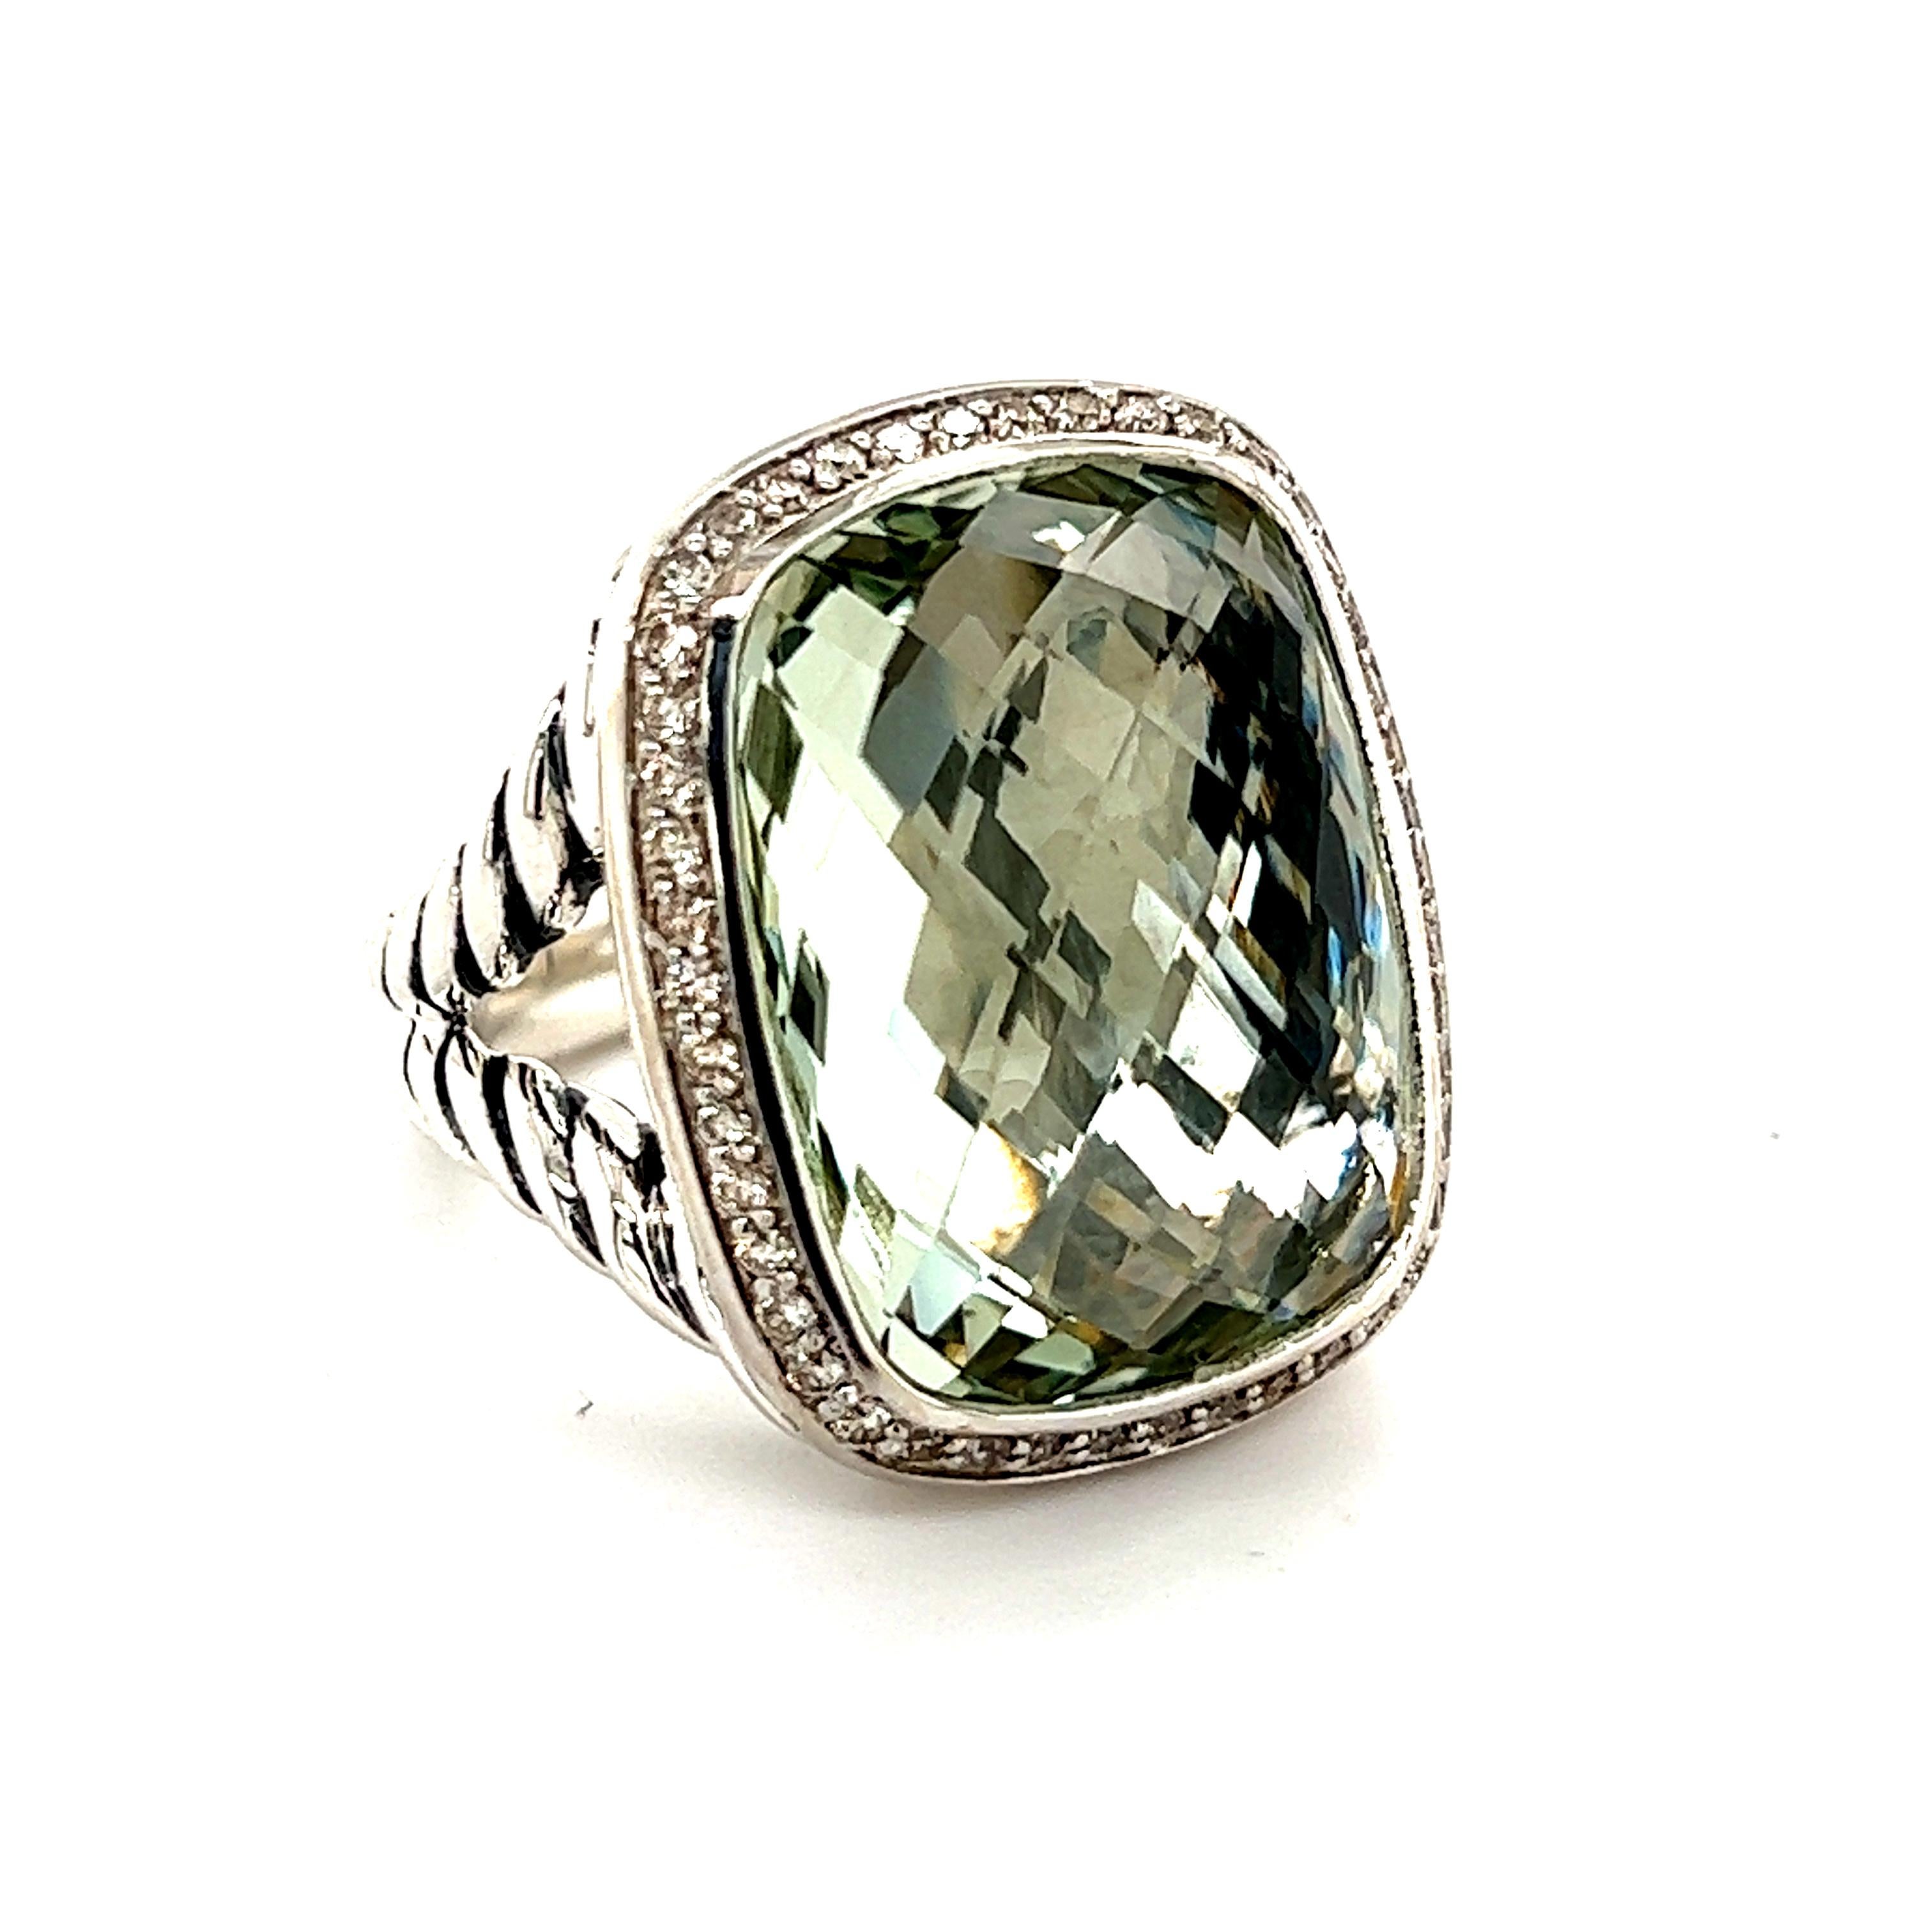 David Yurman Albion Prasiolite Diamond Ring Size 6, 18.4 Grams DY41

This elegant Authentic David Yurman ring is made of sterling silver and has a weight of 18.4 grams.

TRUSTED SELLER SINCE 2002

PLEASE SEE OUR HUNDREDS OF POSITIVE FEEDBACKS FROM